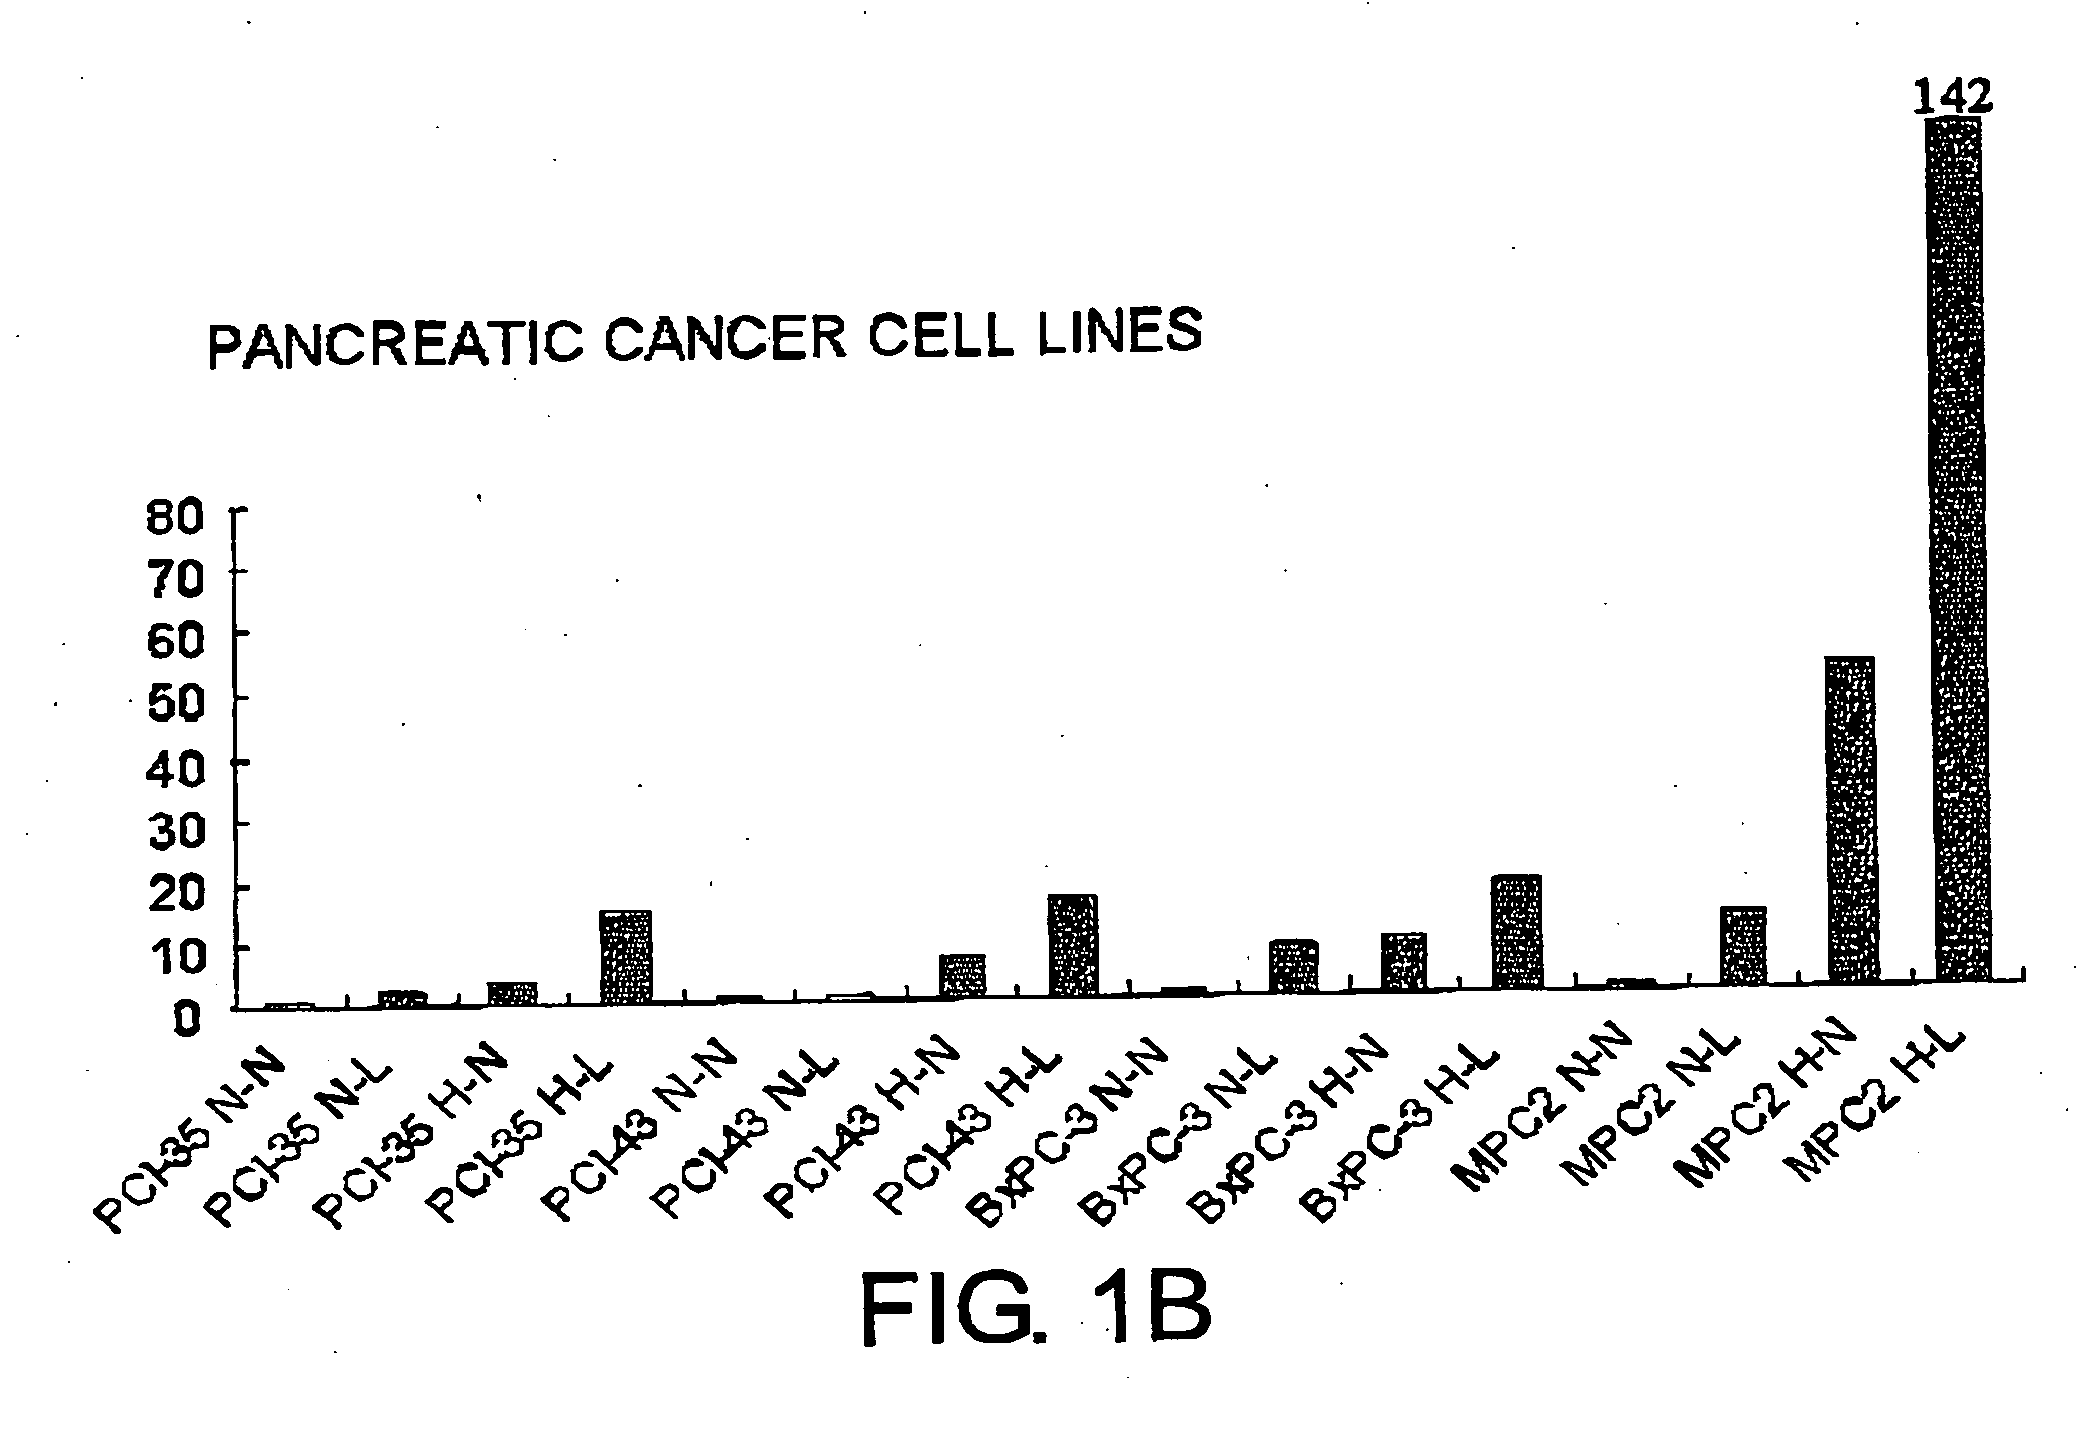 Peptides, DNAs, RNAs, and compounds for inhibiting or inducing adrenomedullin activity, and use of the same